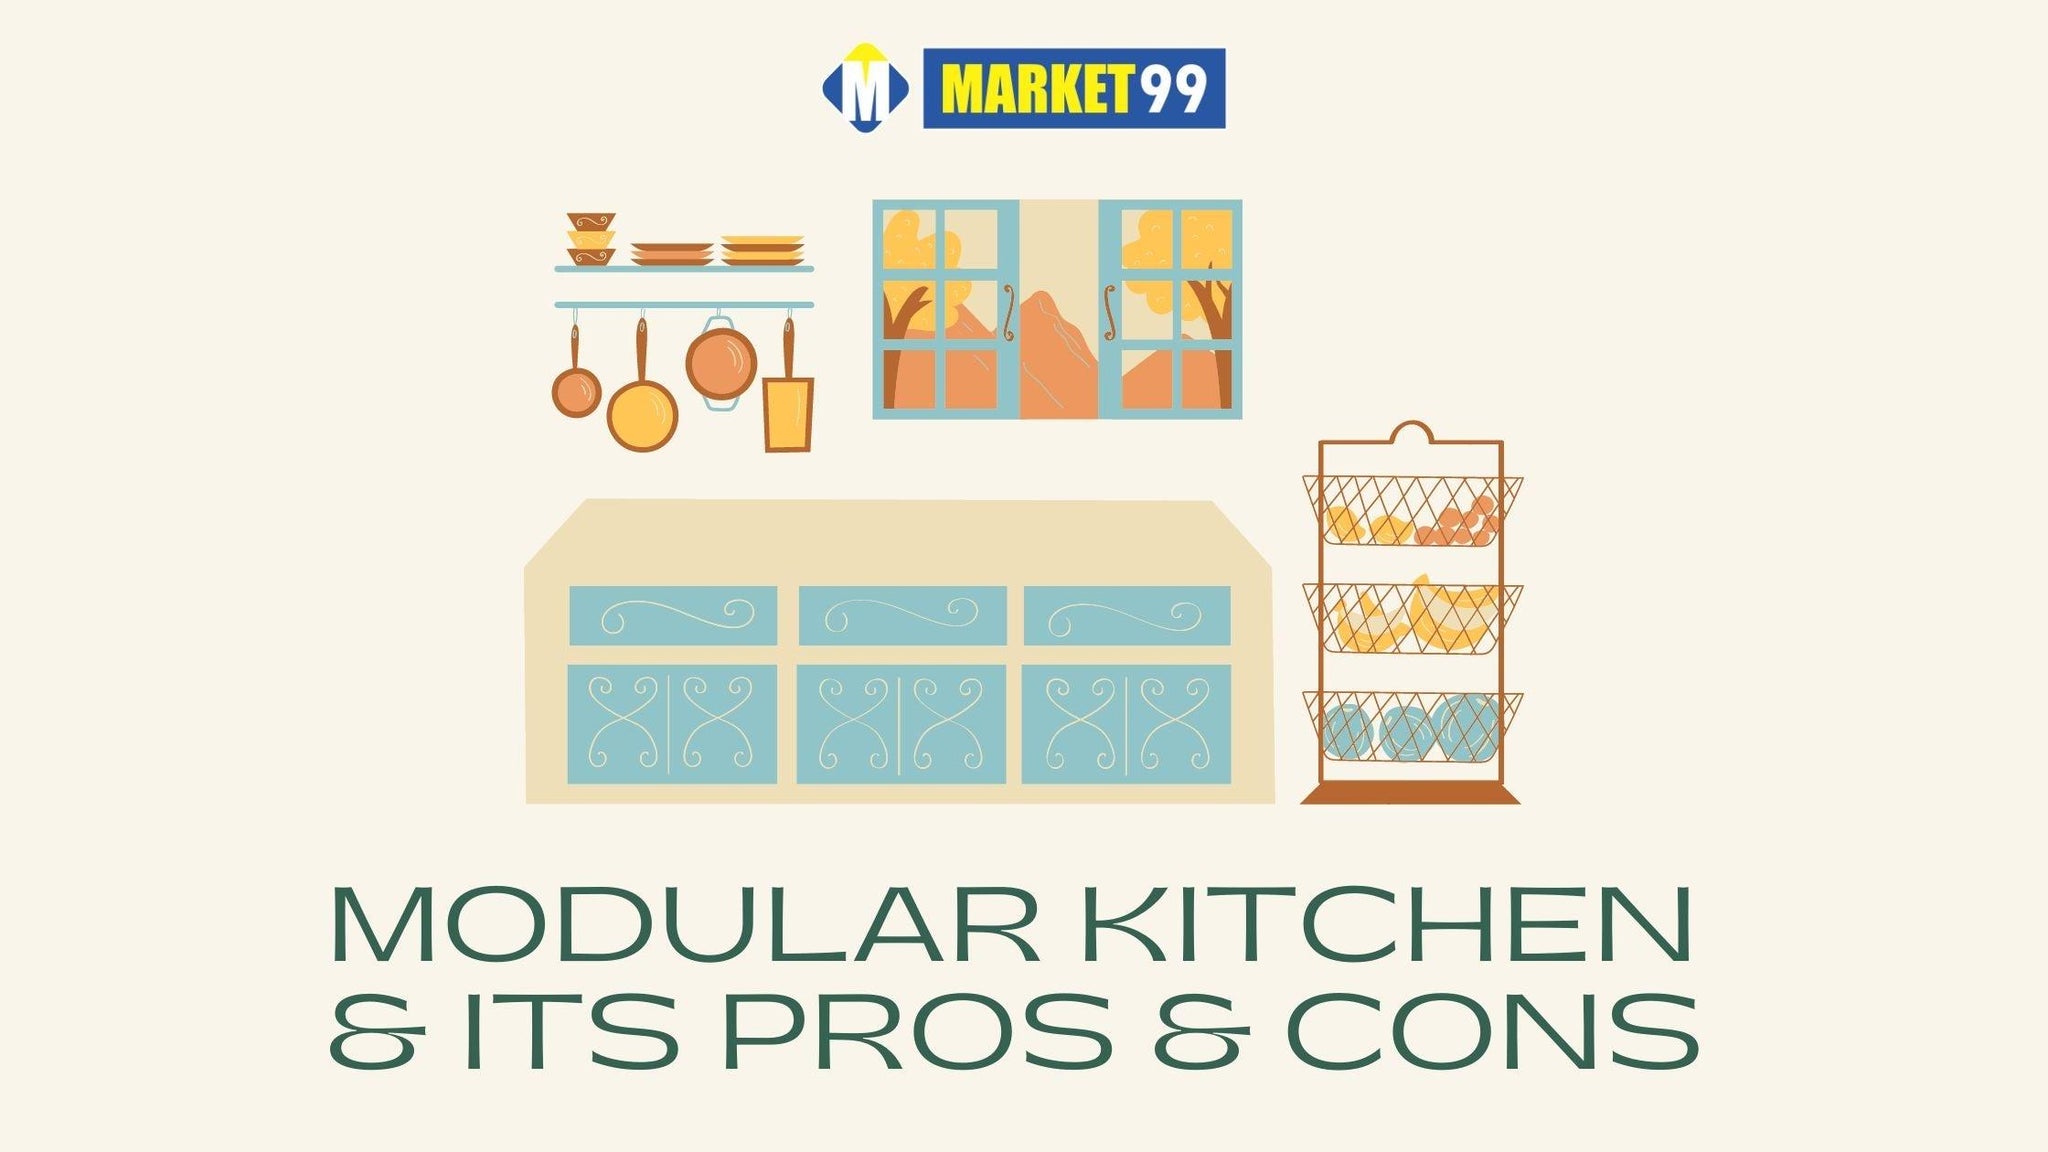 Modular Kitchen and Its Pros & Cons - MARKET 99